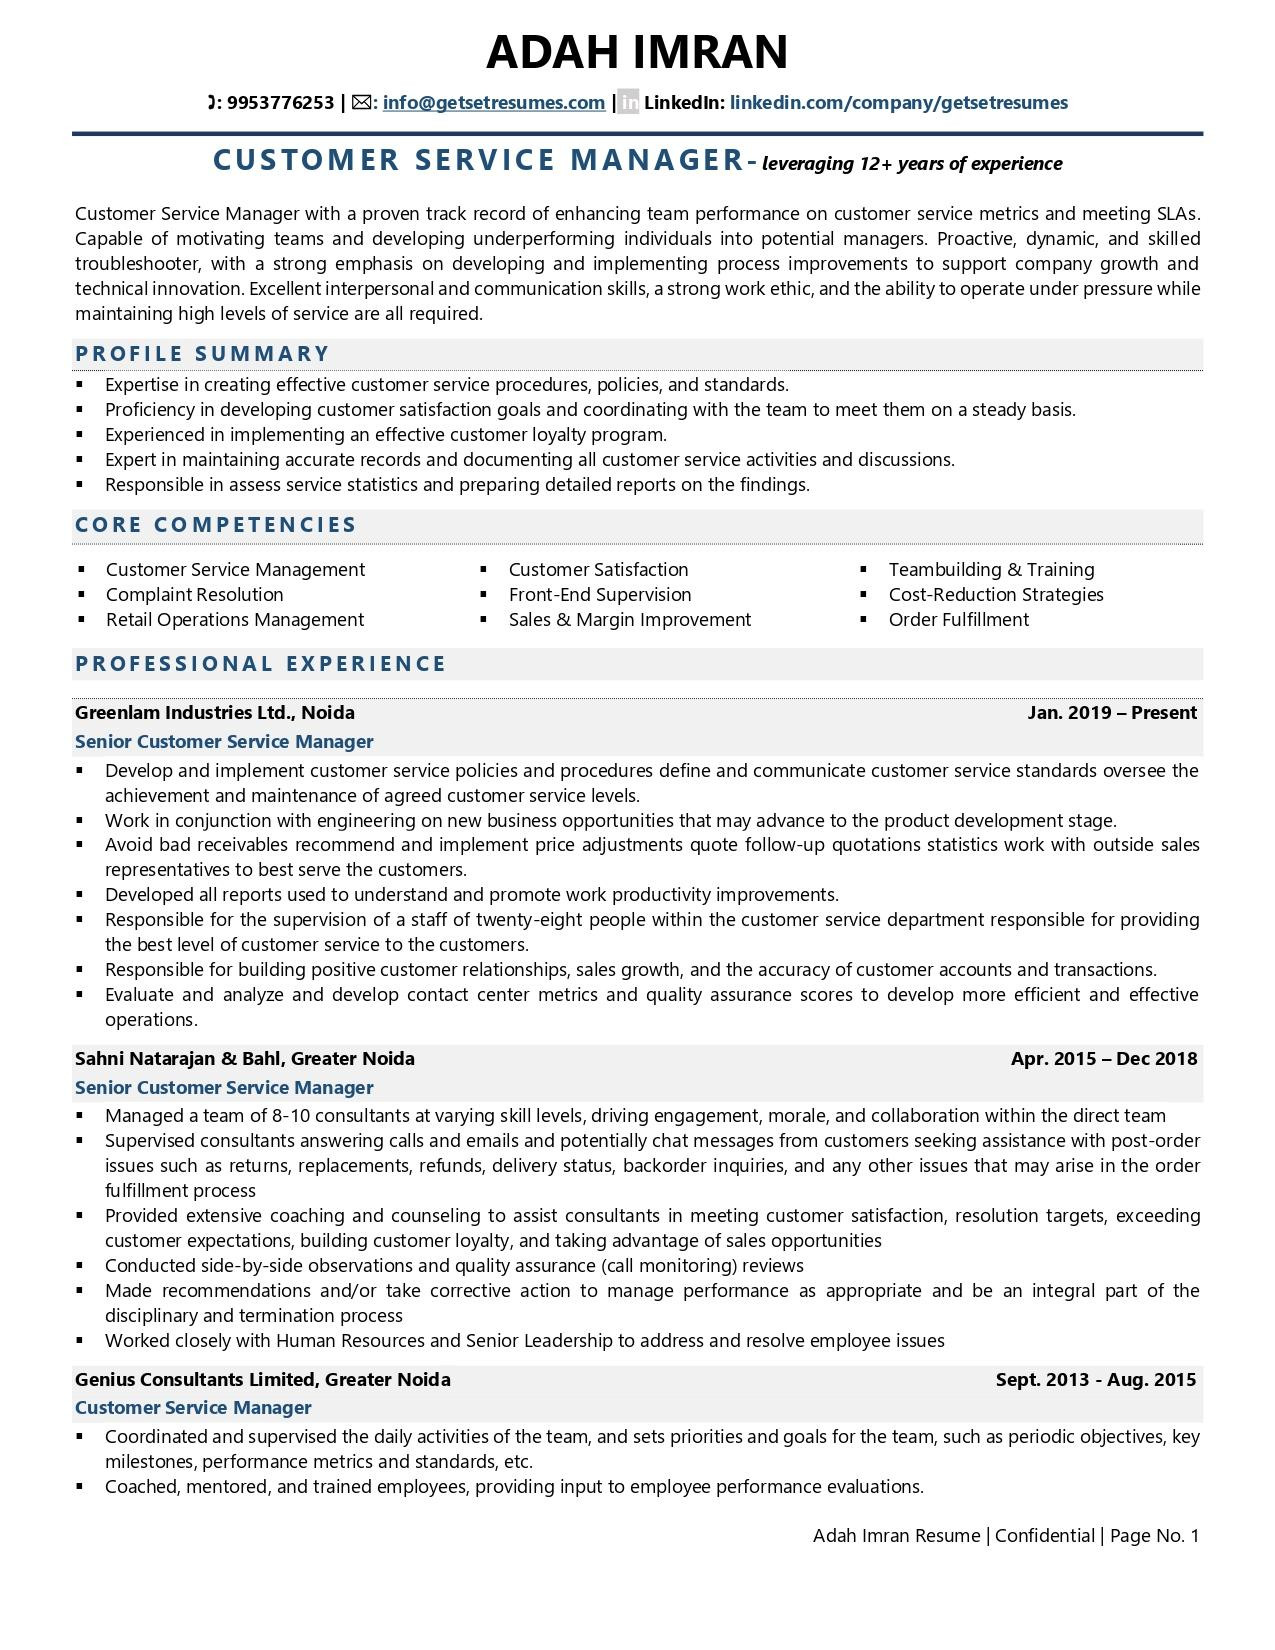 Sample Resume for Experience Customer Service Manager Customer Service Manager Resume Examples & Template (with Job …